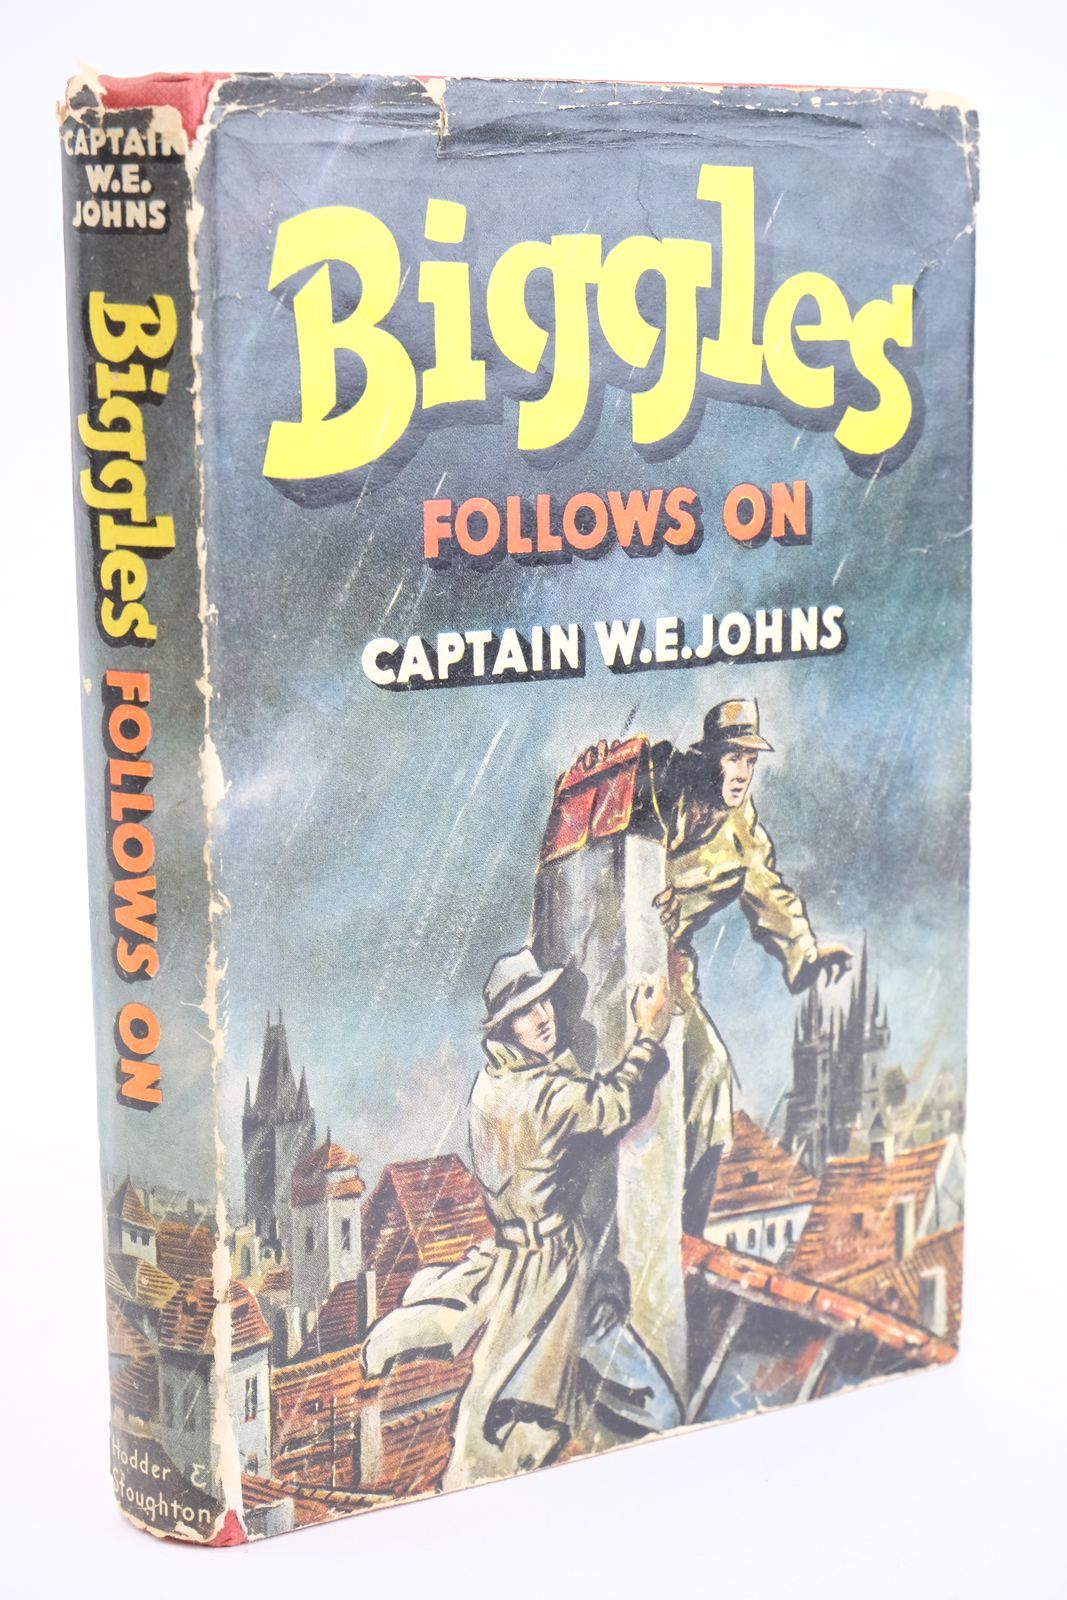 Photo of BIGGLES FOLLOWS ON written by Johns, W.E. illustrated by Stead, published by Hodder &amp; Stoughton (STOCK CODE: 1323879)  for sale by Stella & Rose's Books